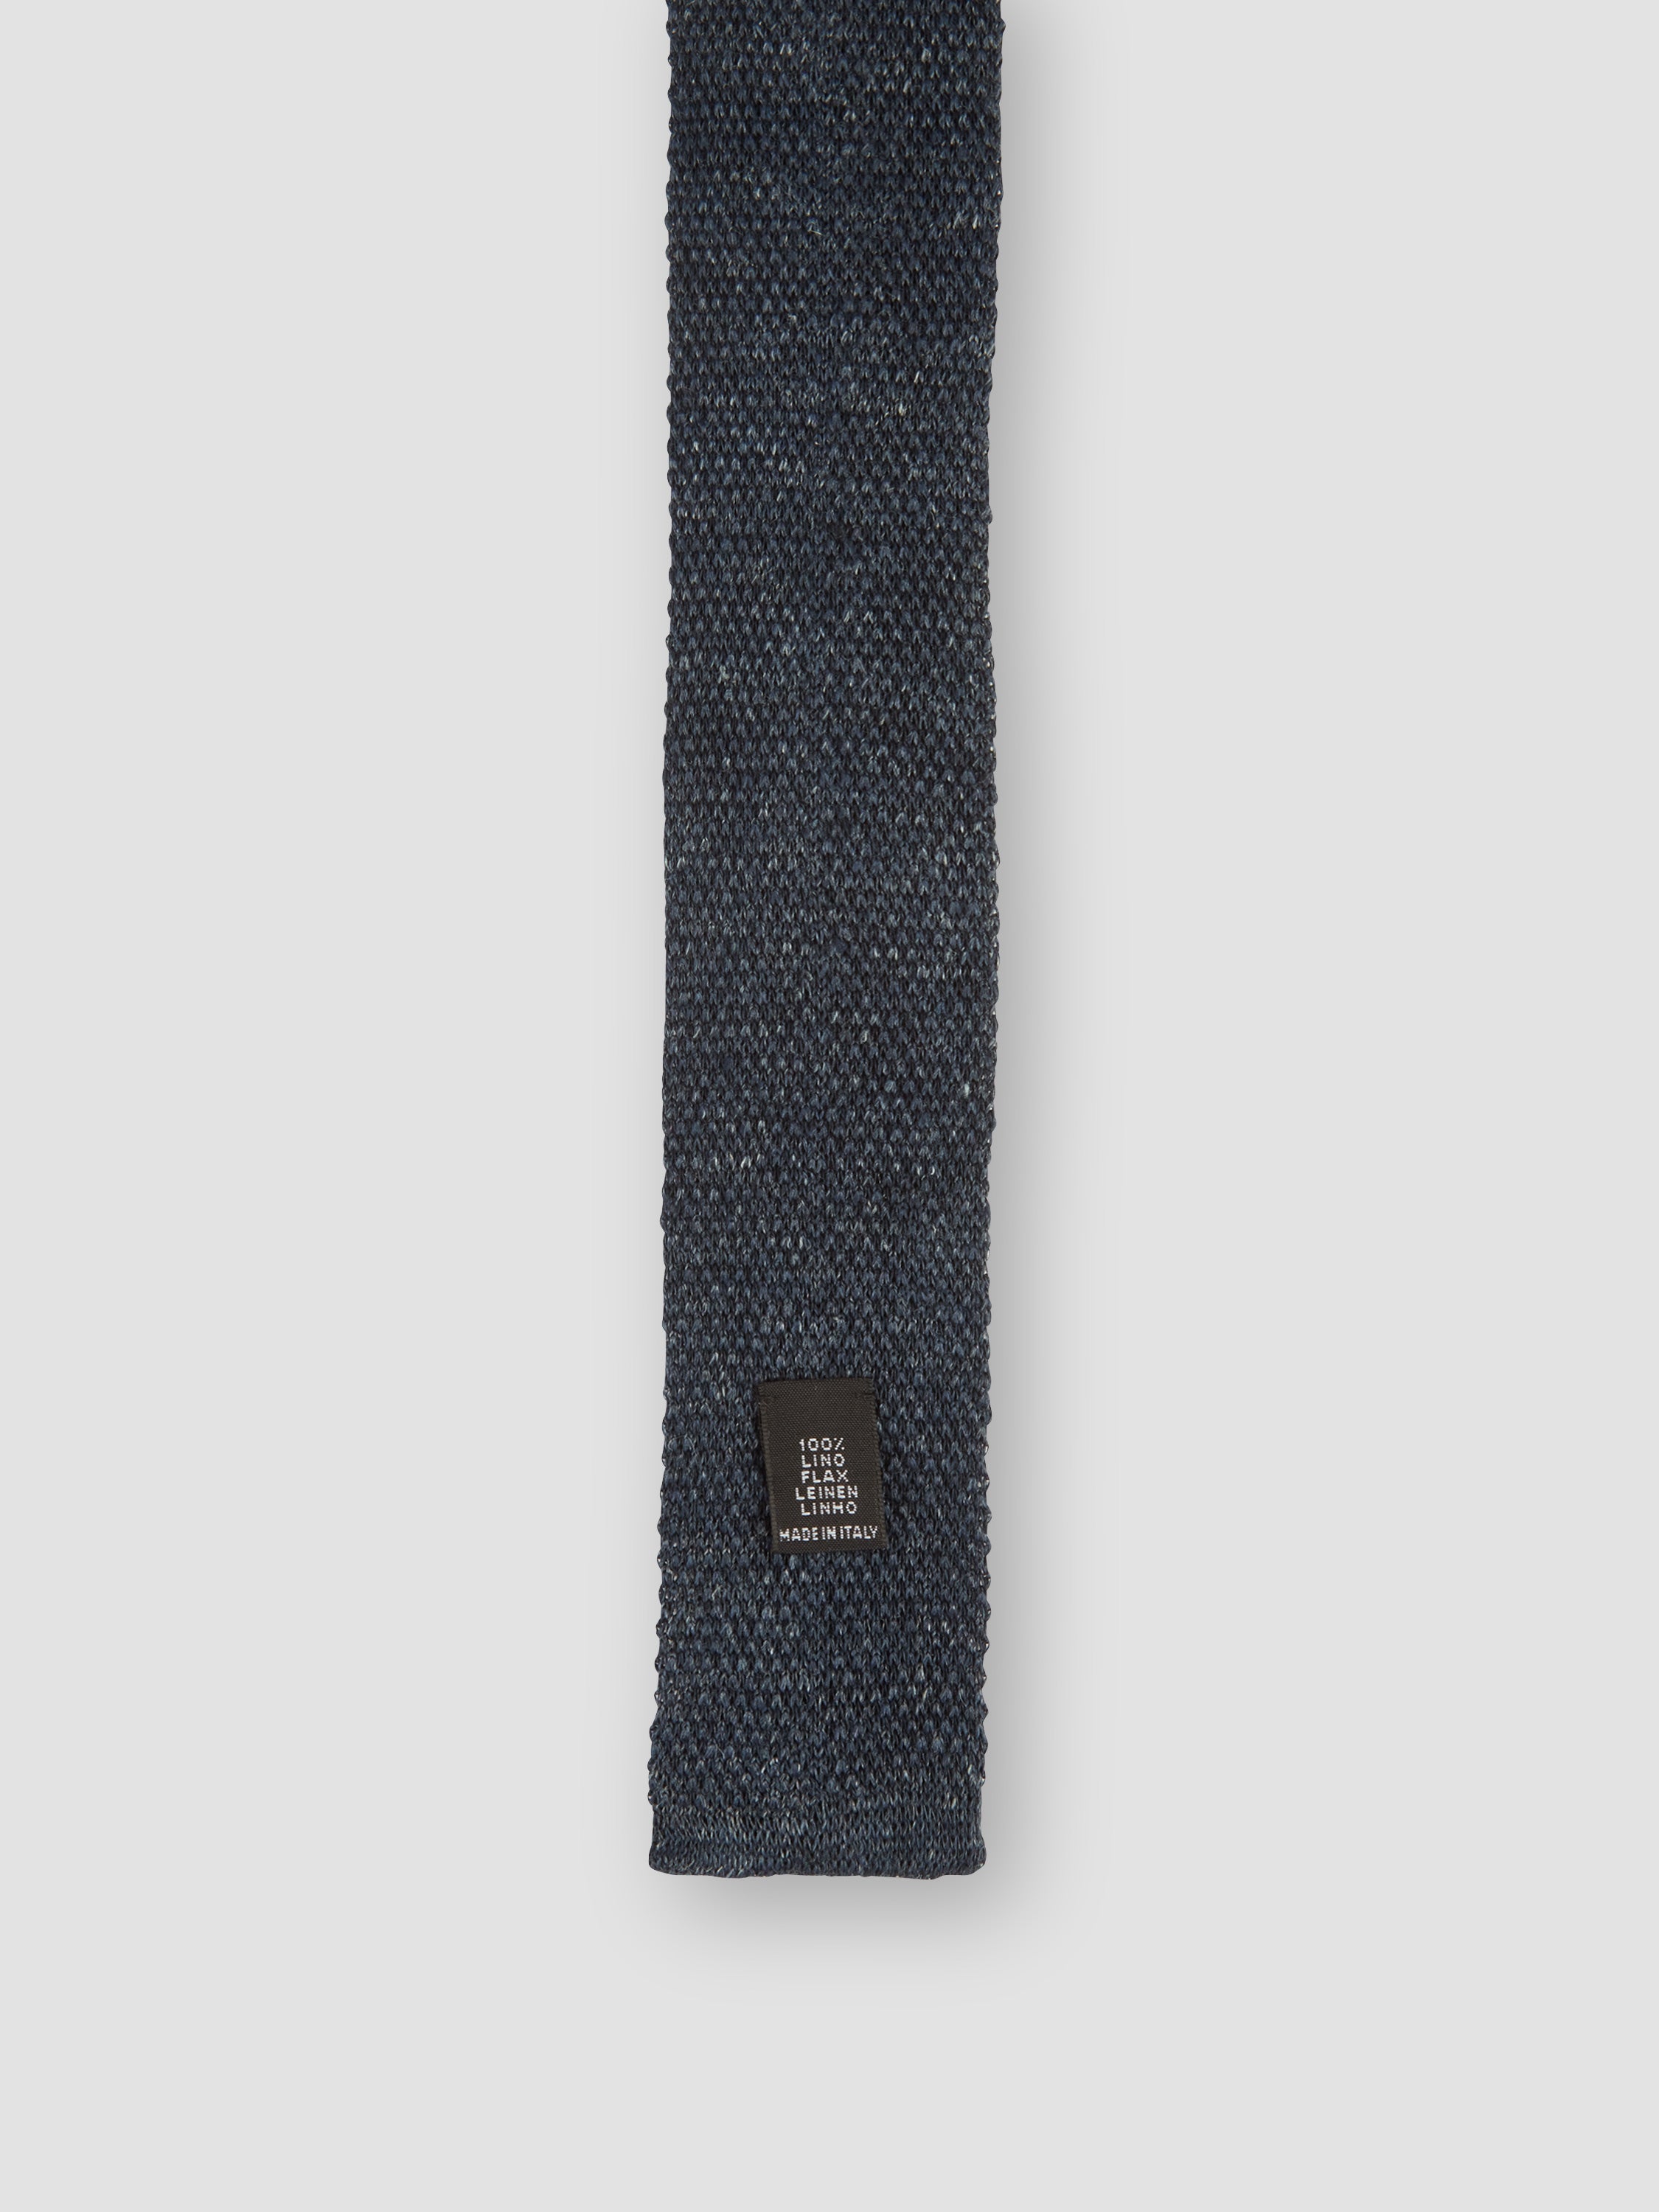 Knitted Linen Tie Classic Blue Product Label